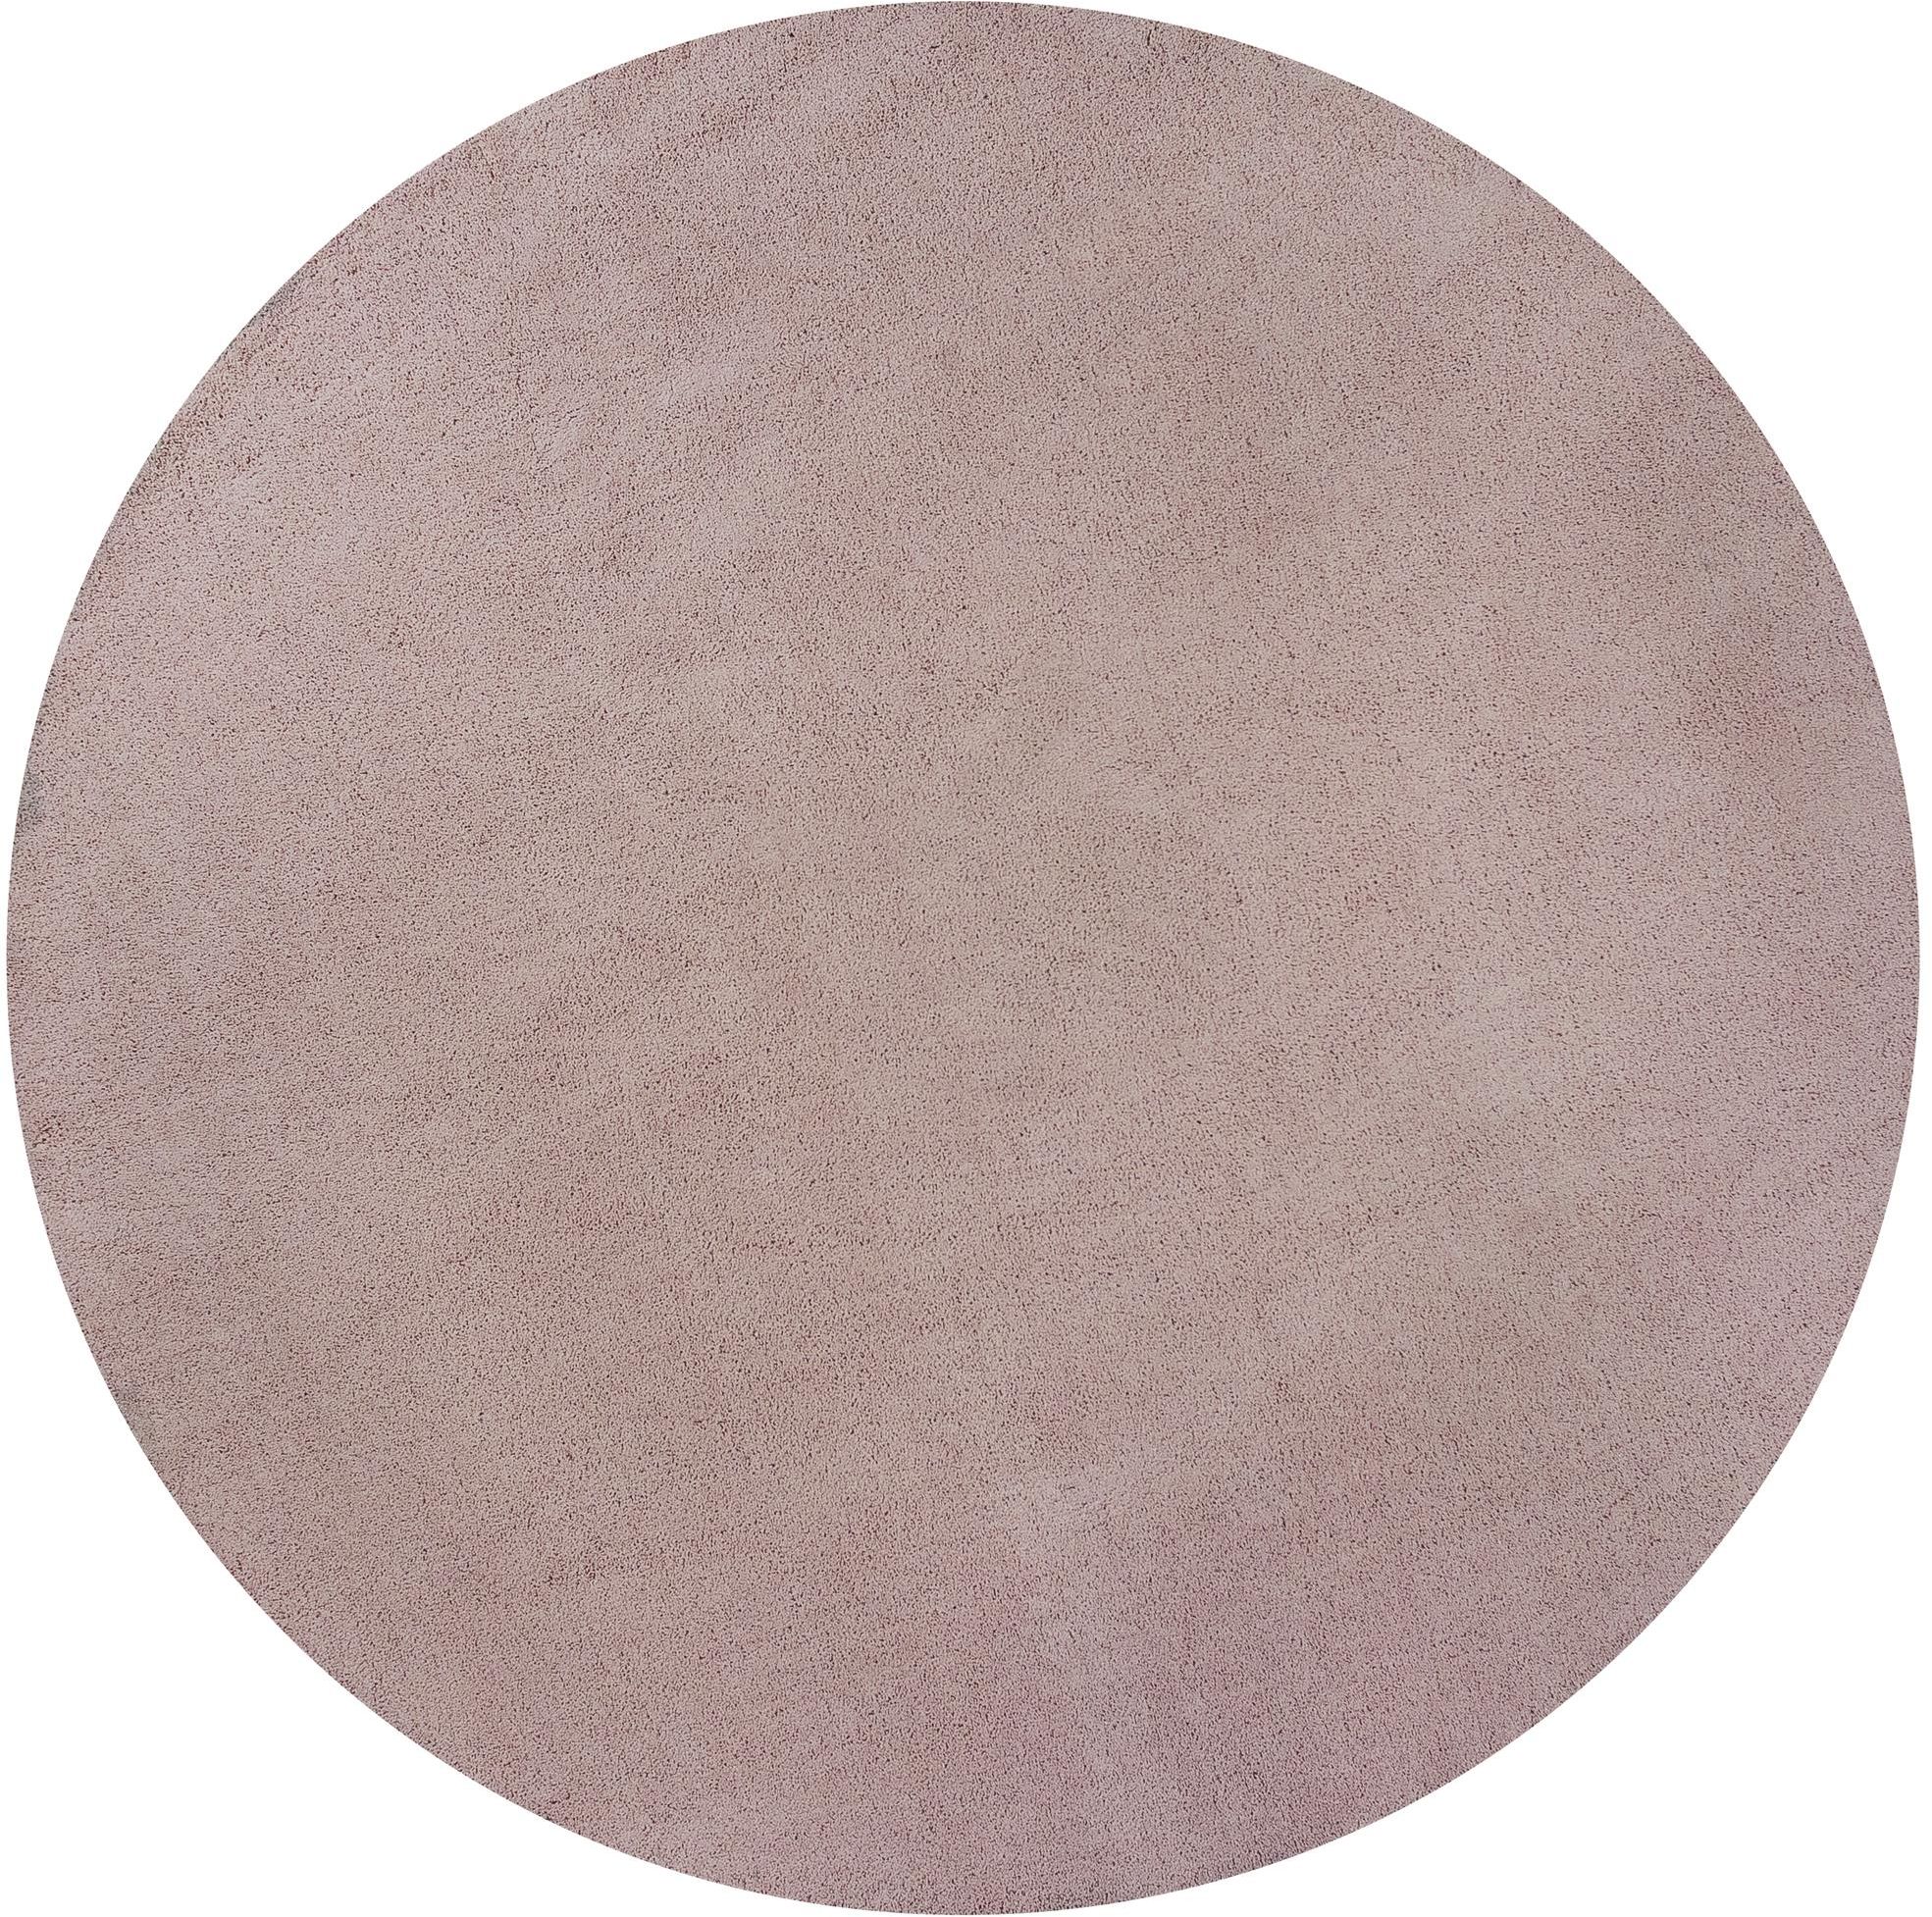 KAS Bliss 6' Round Rug